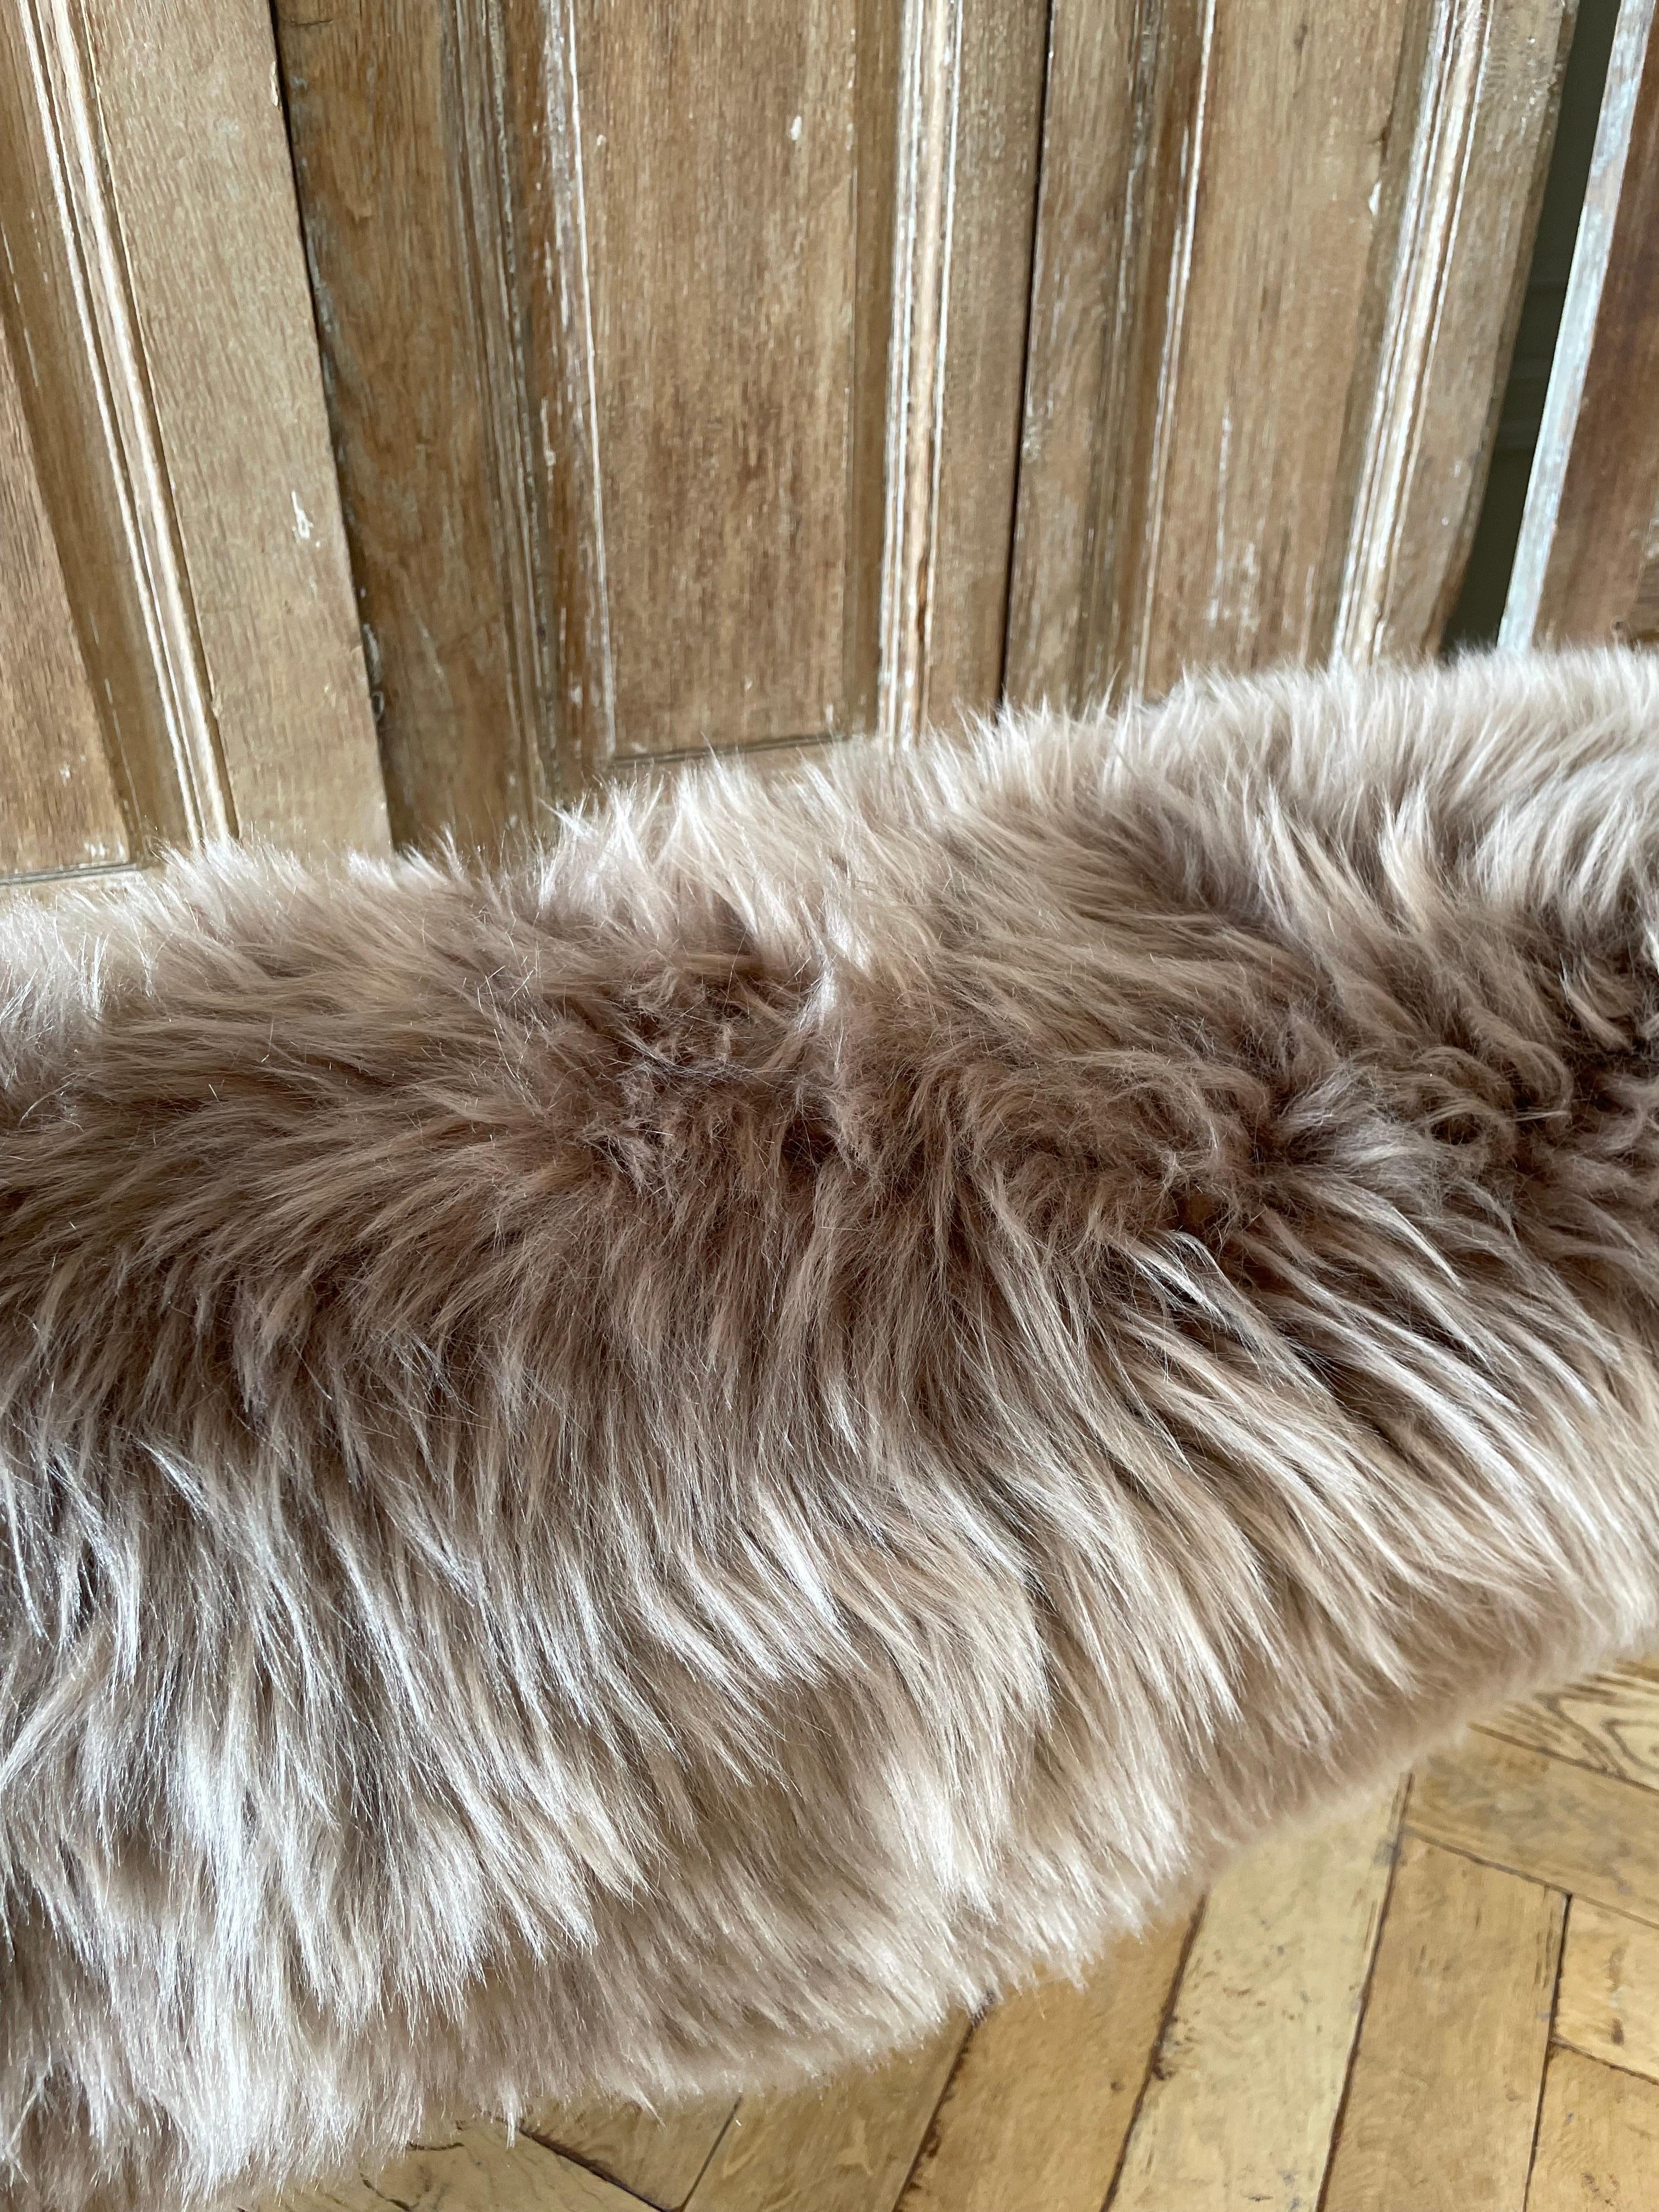 Natural Sheep Skin Rug or Throw  In Excellent Condition For Sale In Brea, CA